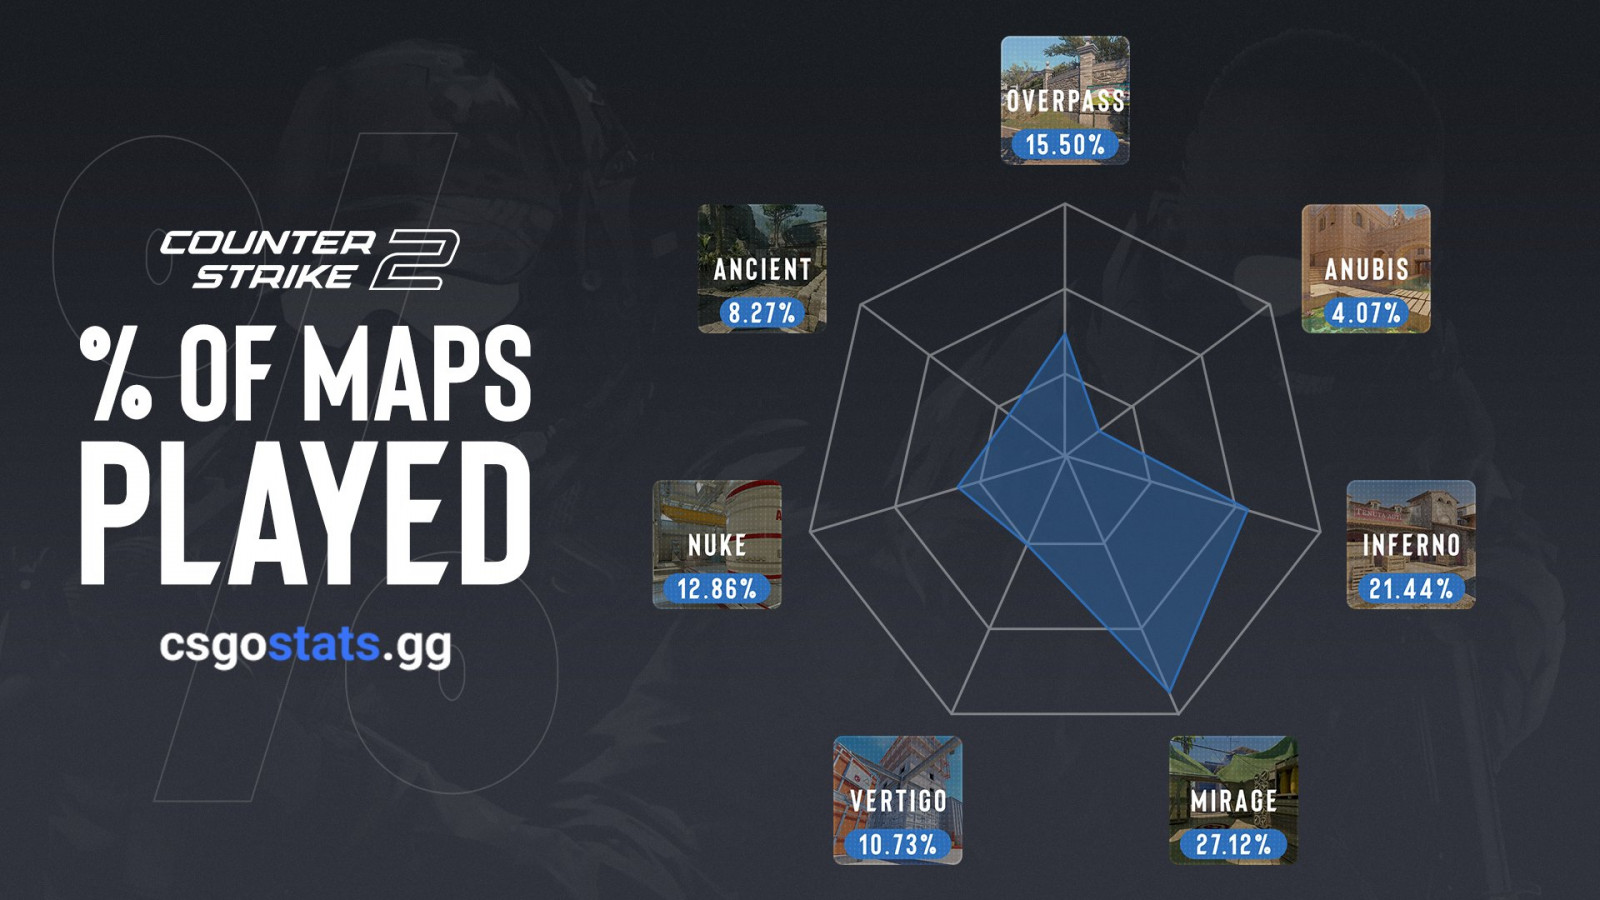 Who are NA's top-rated players in the CS2 Beta? 